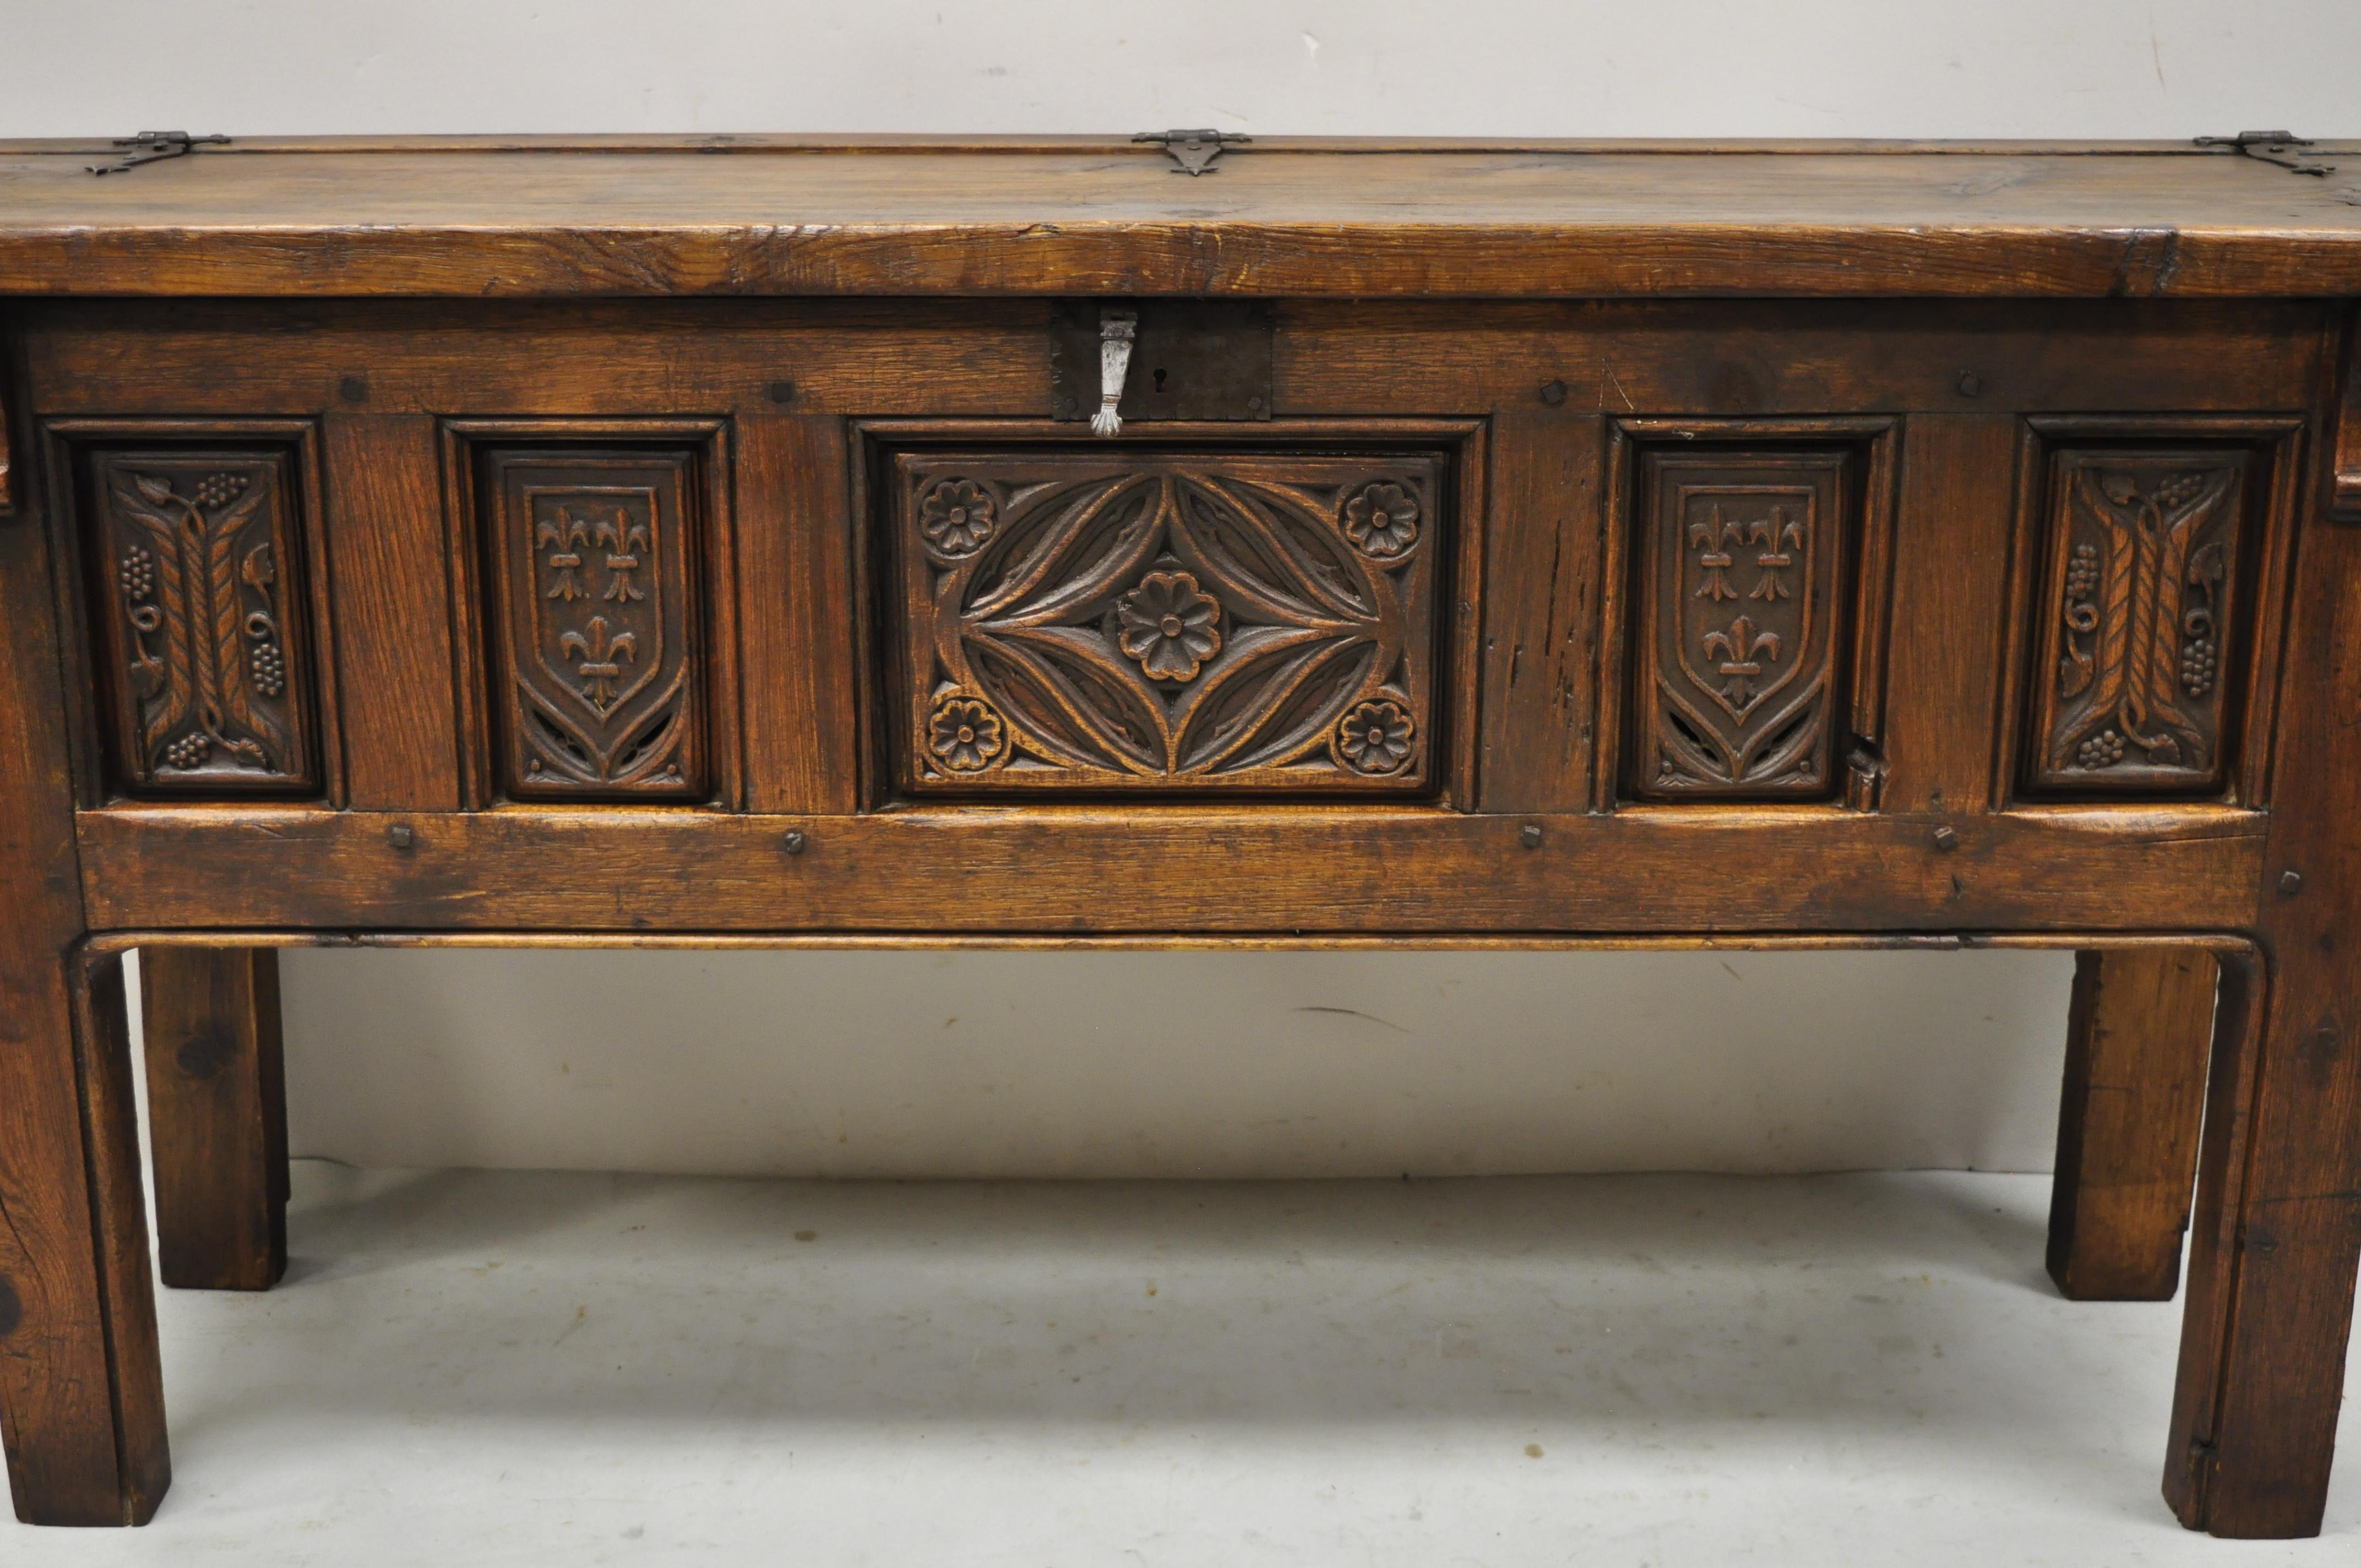 19th century antique Spanish Jacobean oak walnut coffer trunk chest on legs. Item features original authentic patina, cast iron hardware, lift lid, up on legs, solid wood construction, beautiful wood grain, nicely carved details, very nice antique